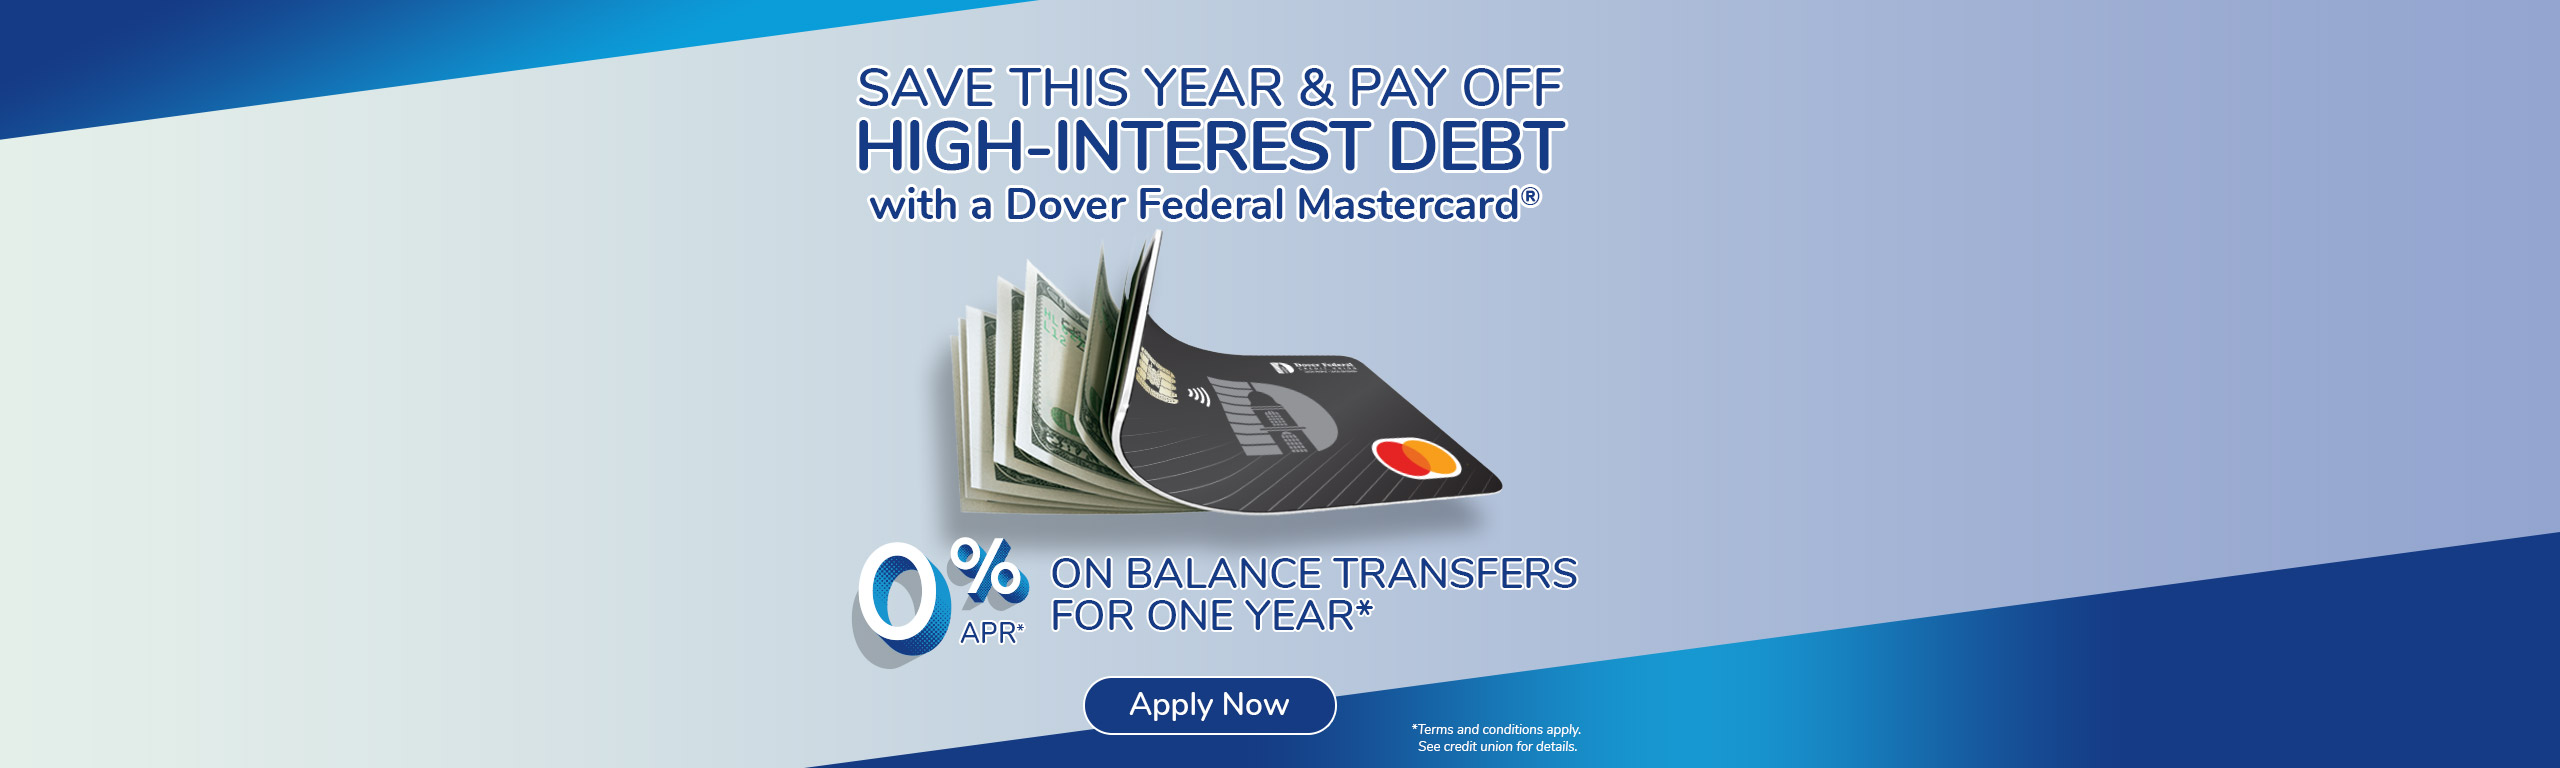 Pay Off High-Interest Debt with a Dover Federal Mastercard. 0% on balance transfers for one year*